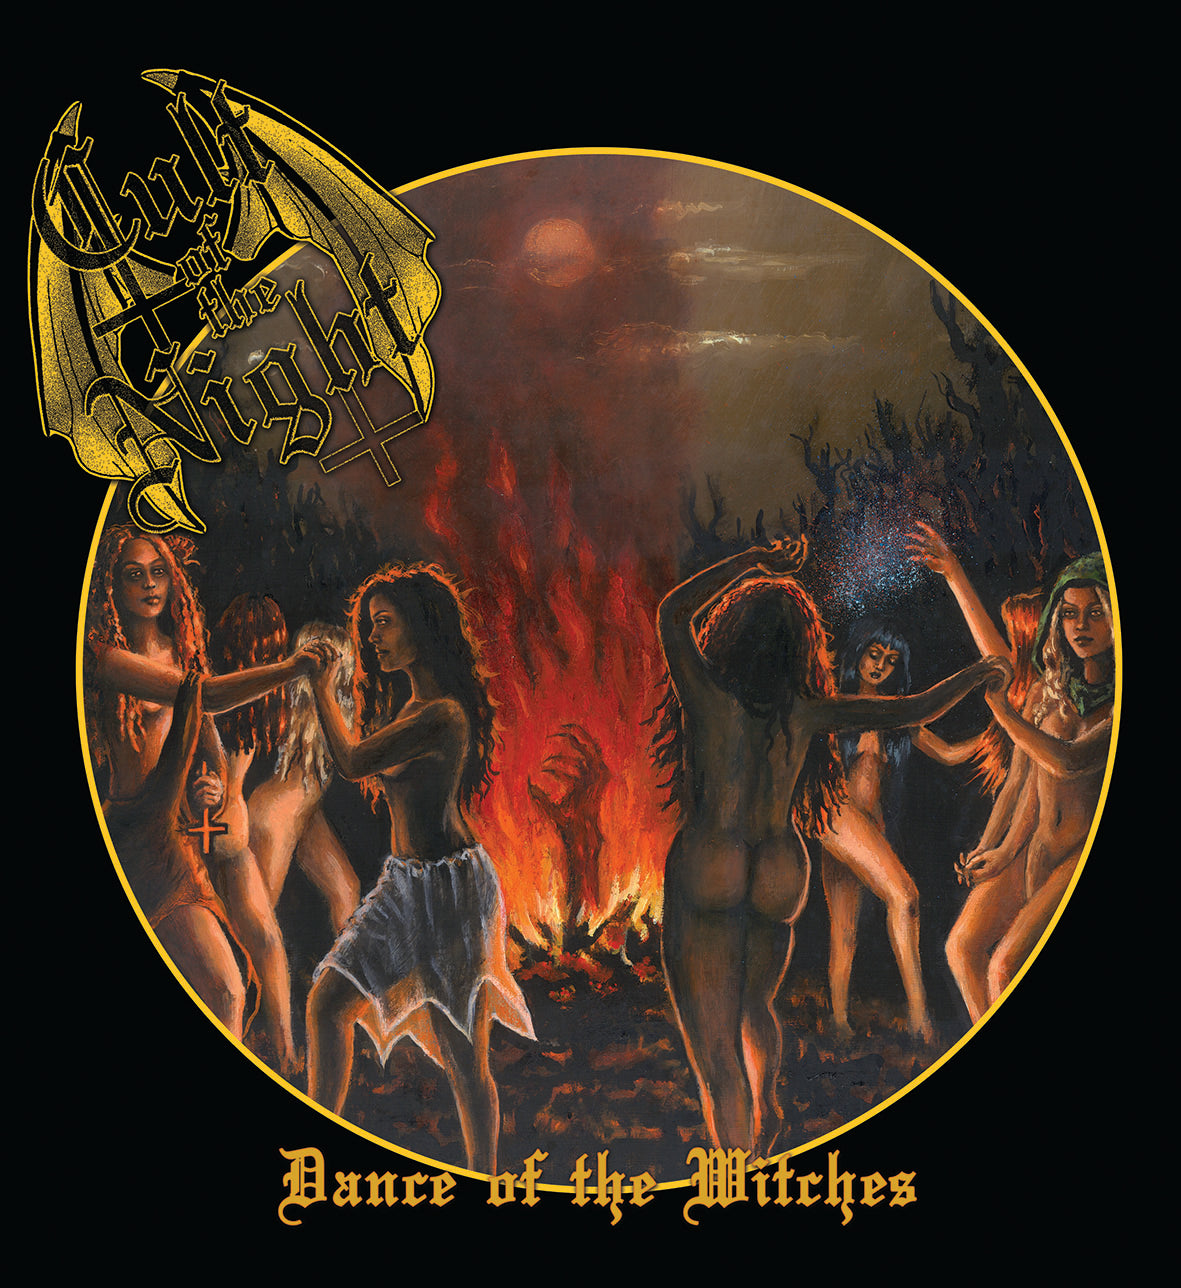 Cult of the Night - Dance of the Witches EP